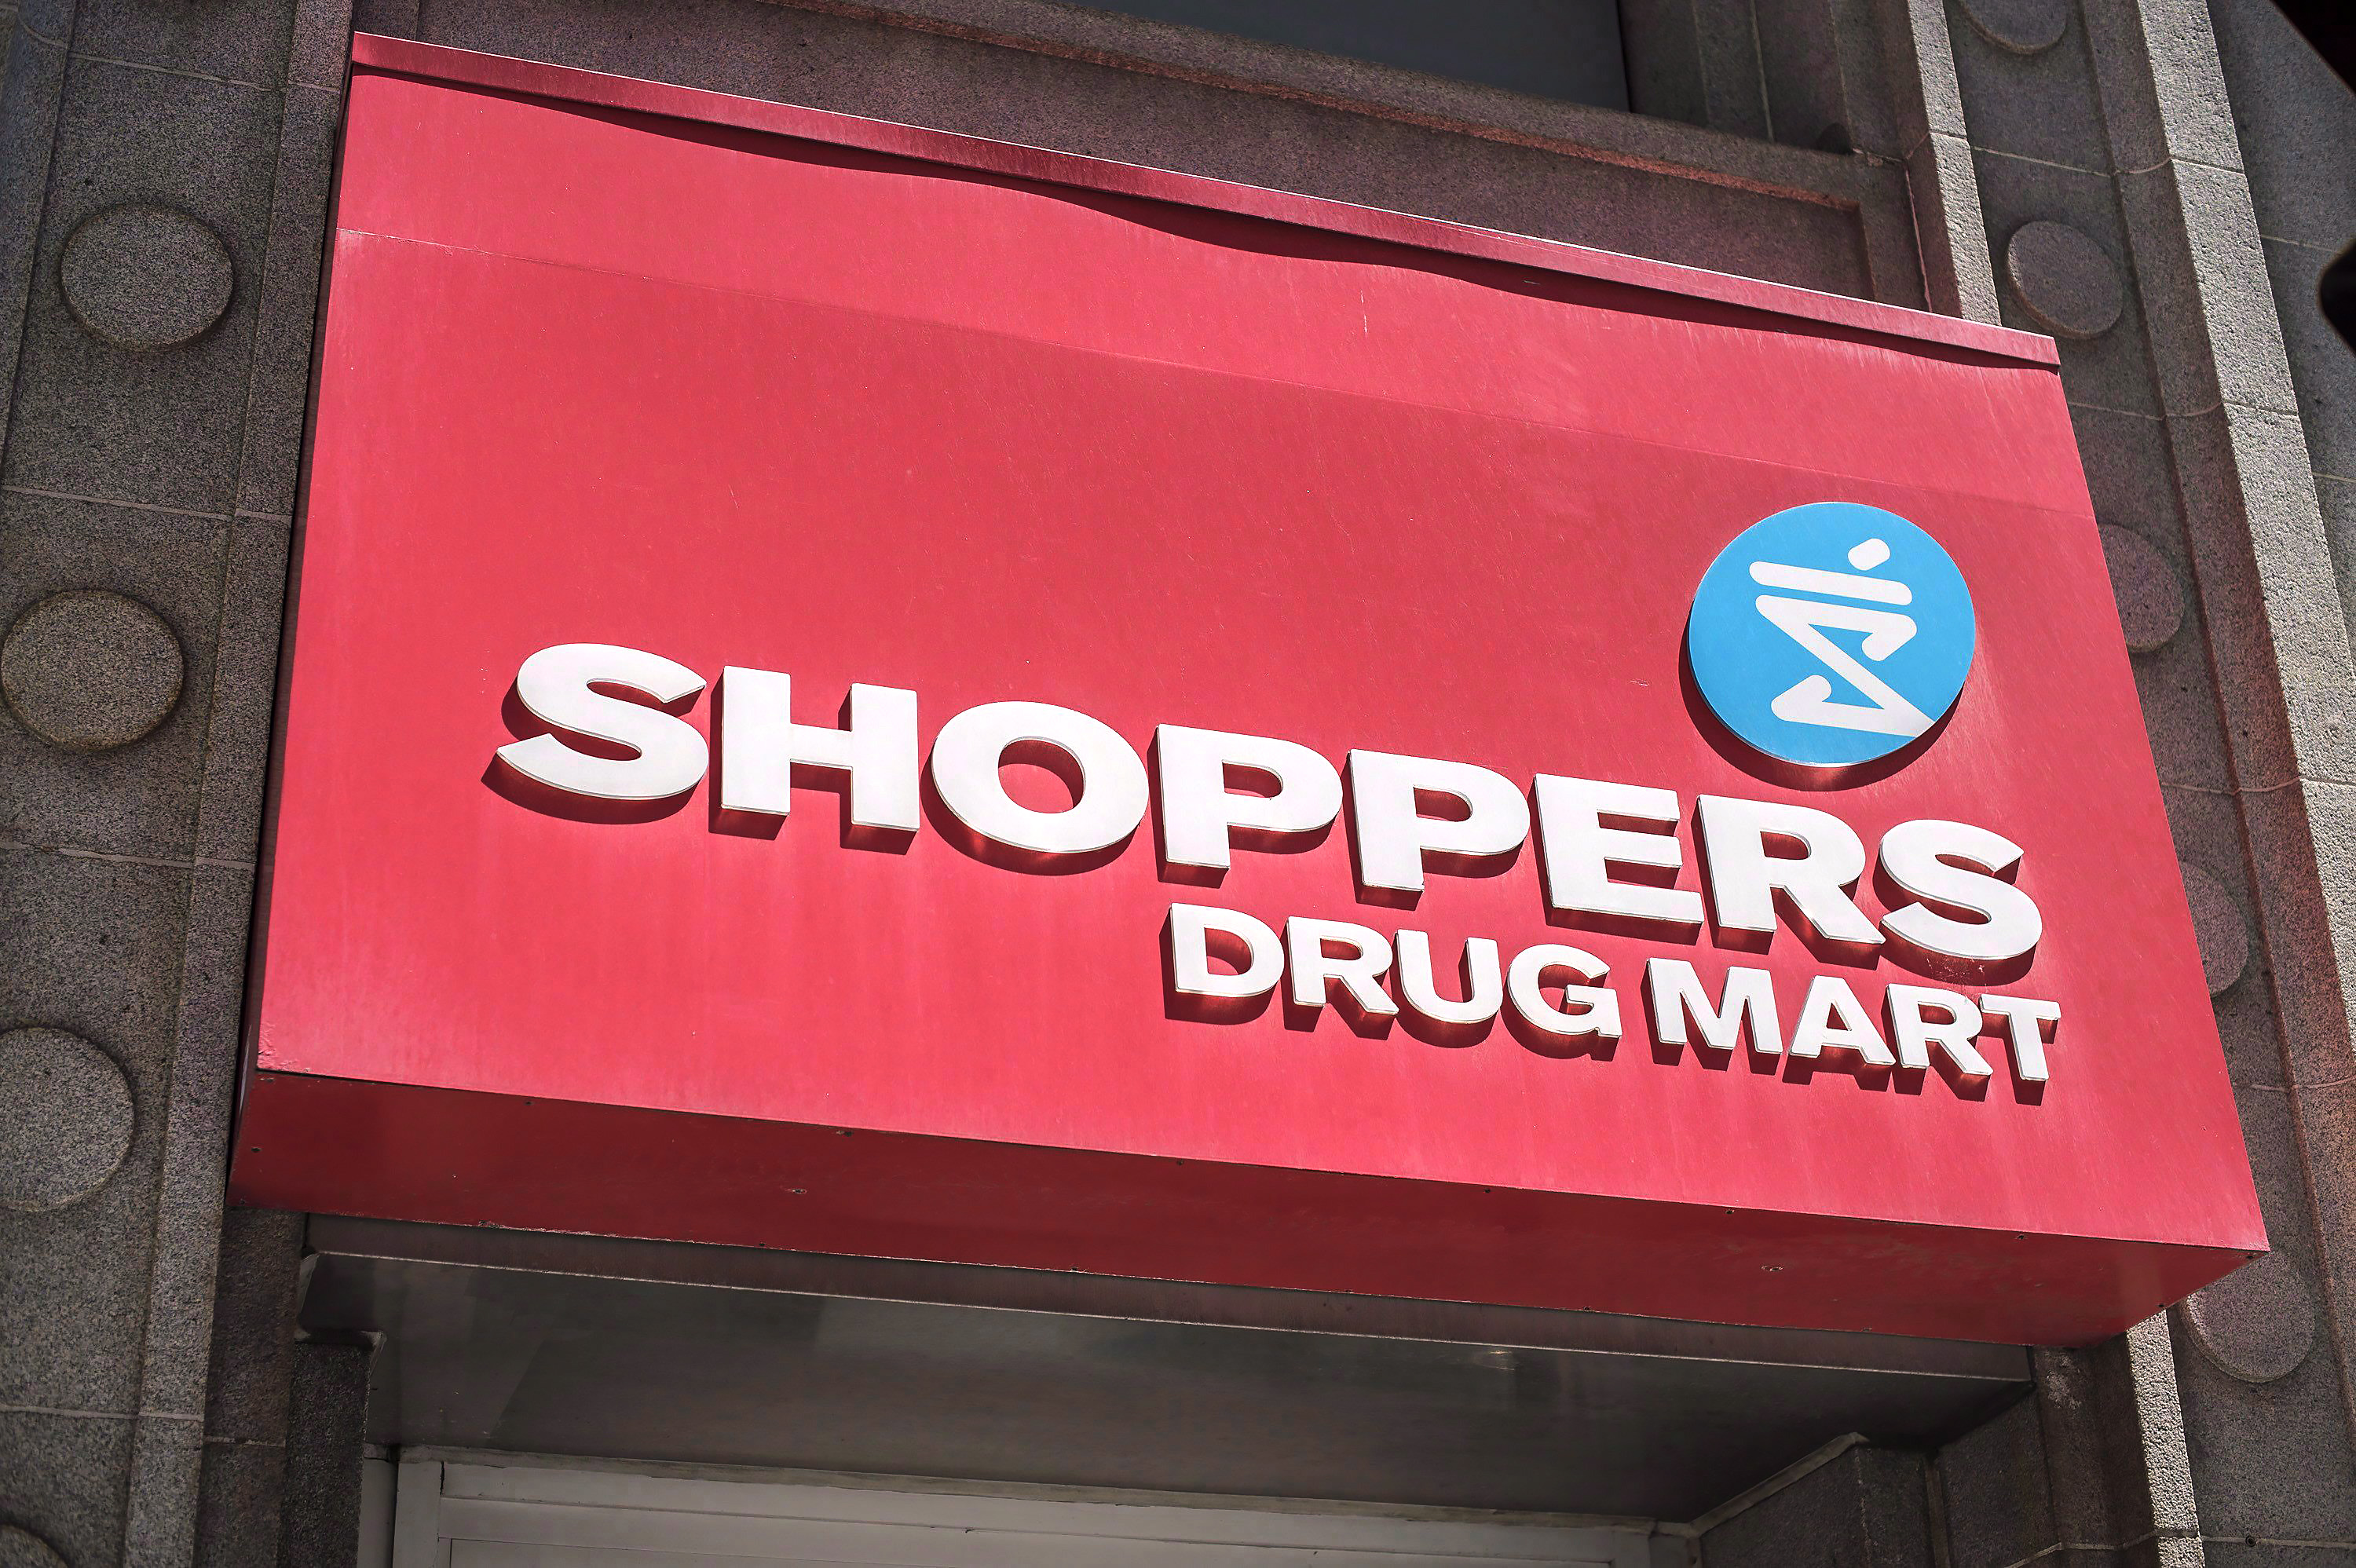 Shoppers faces proposed class action over claims company is ‘abusive’ to pharmacists